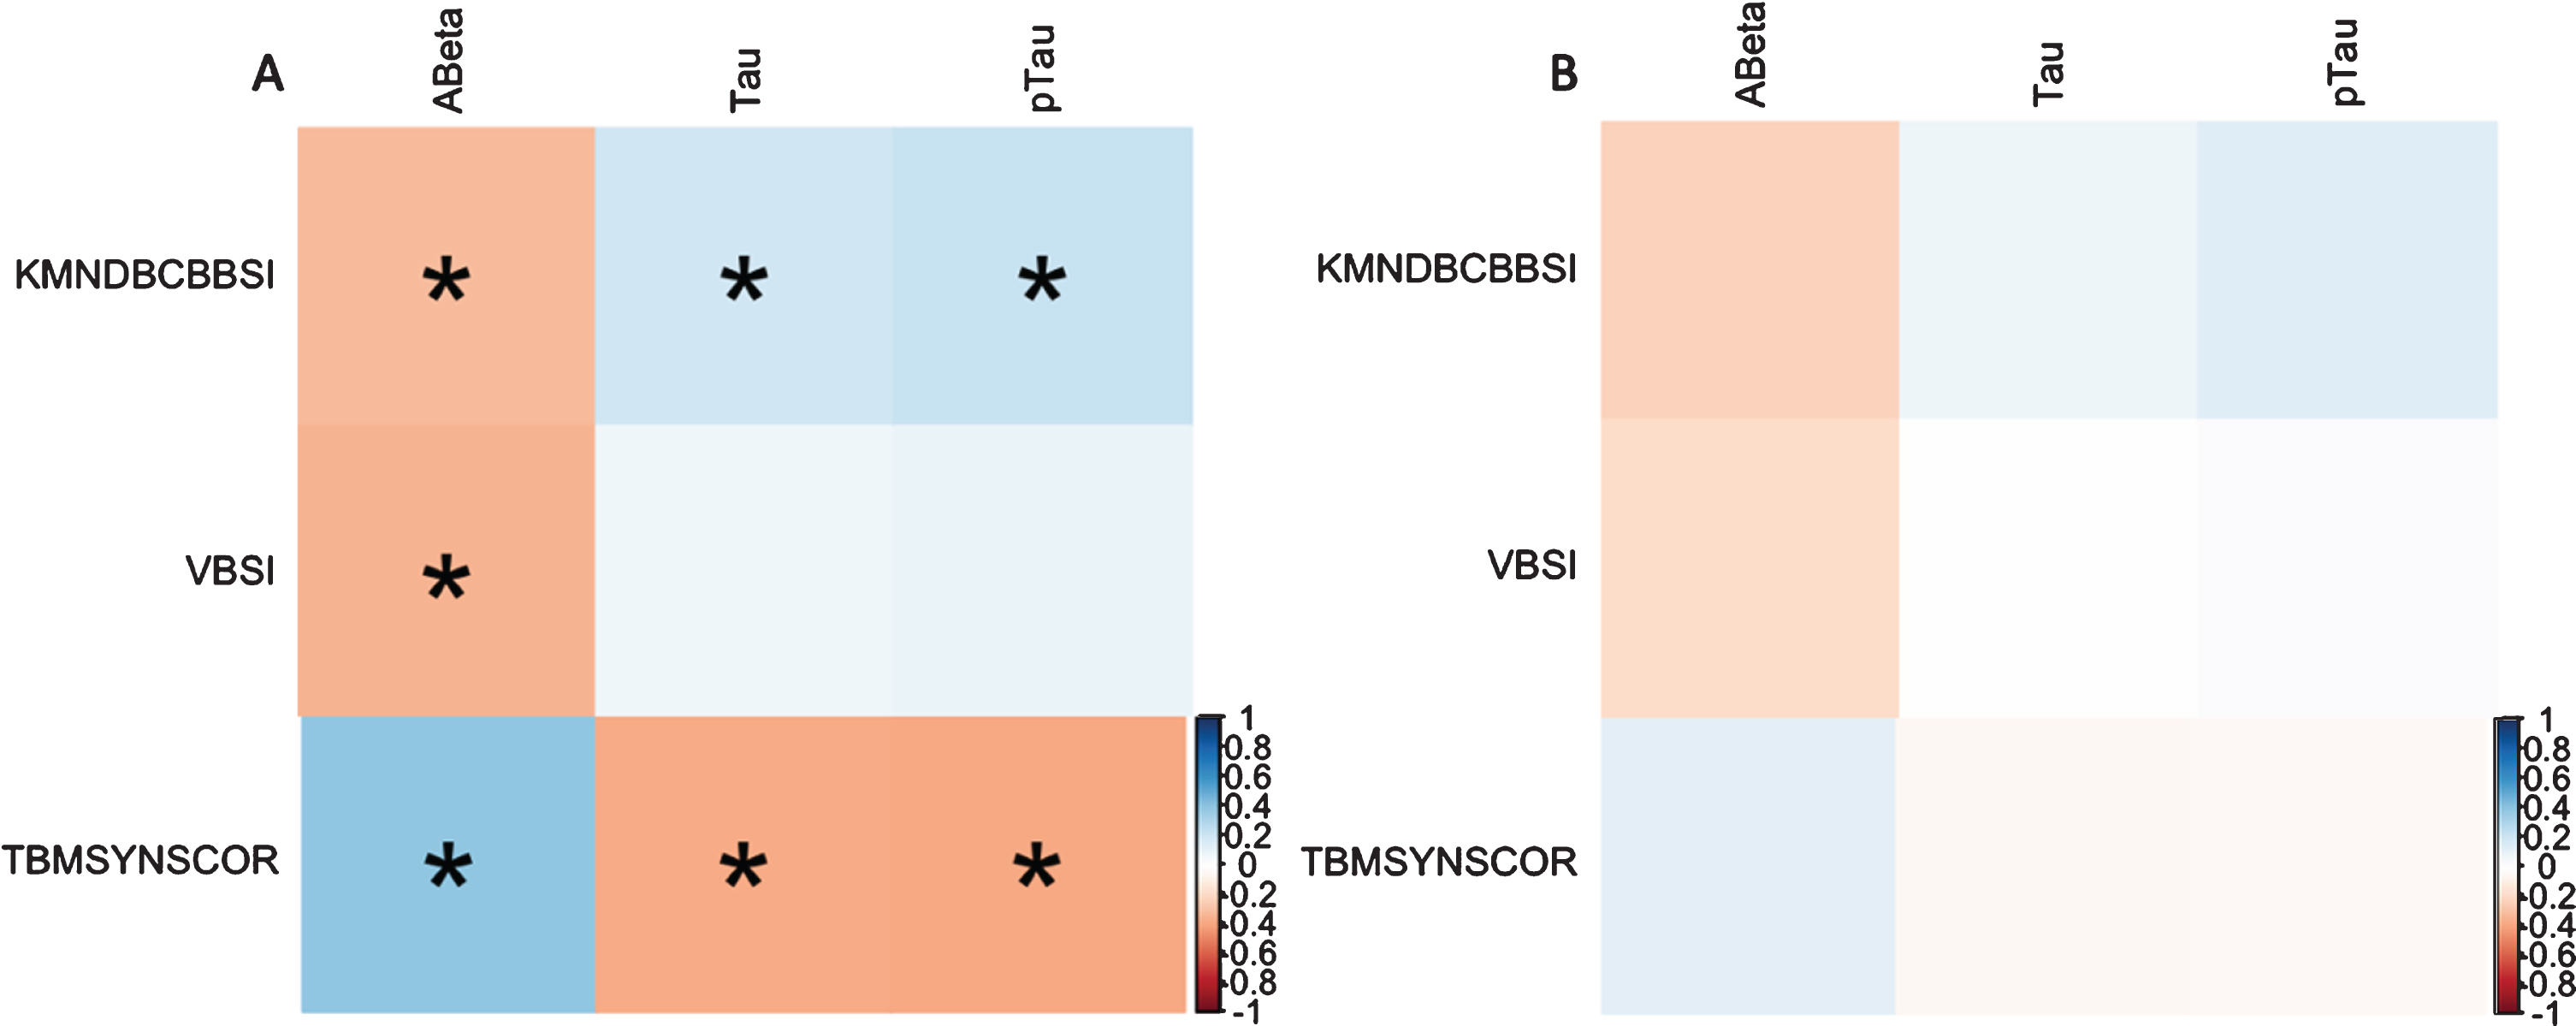 Correlation plot of atrophy measurements and CSF biomarkers. Correlation plot in Stable MCI (A) and reversion (B) groups. Aβ, amyloid-β; t-tau, total tau; p-tau, hyperphosphorylated tau; KMNDBCBBSI, K-means clustering differential bias-corrected BSI; VBSI, Ventricular BSI; TBMSYNSCOR, Tensor Based Morphometry –Symmetric Diffeomorphic Image Normalization score.*Significant correlation (p < 0.05).